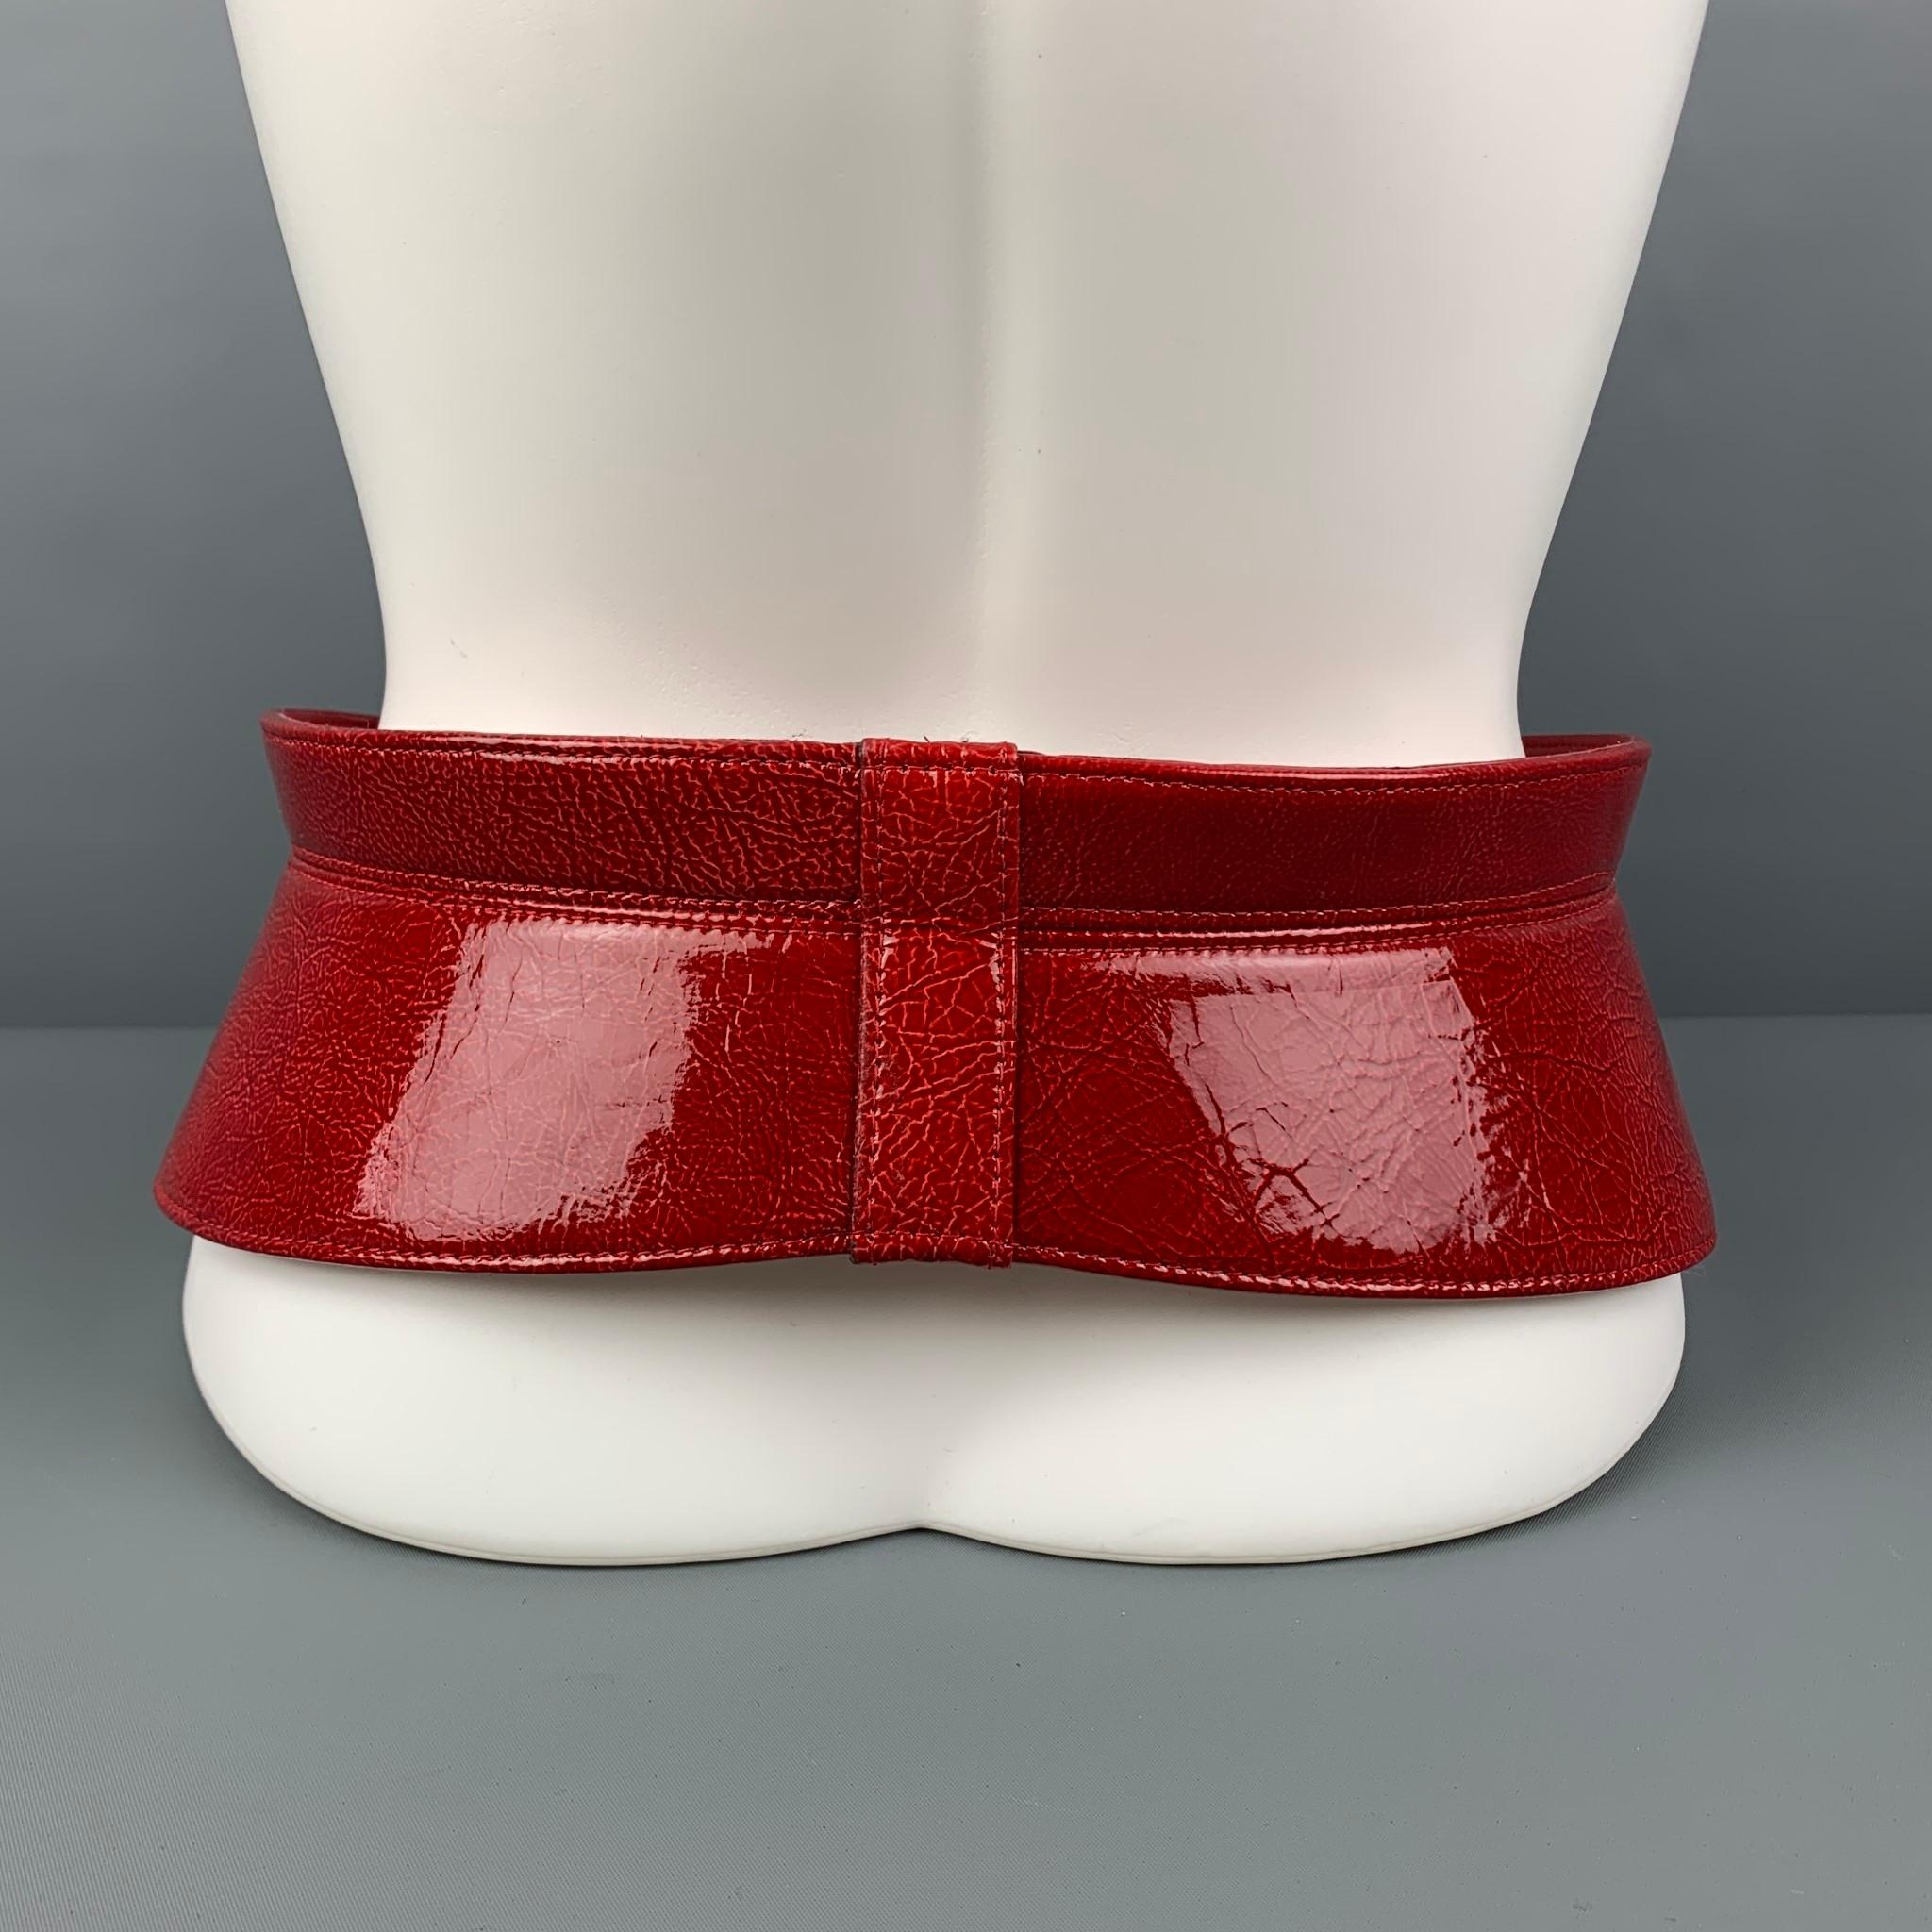 OSCAR DE LA RENTA belt comes in a red patent leather featuring a corset style and a gold tone buckle closure. Made in Italy. 

Very Good Pre-Owned Condition.
Marked: M 6N972

Length: 37 in.
Width: 3.25 in.
Fits: 33 in. - 36 in.
Buckle: 1.5 in. 